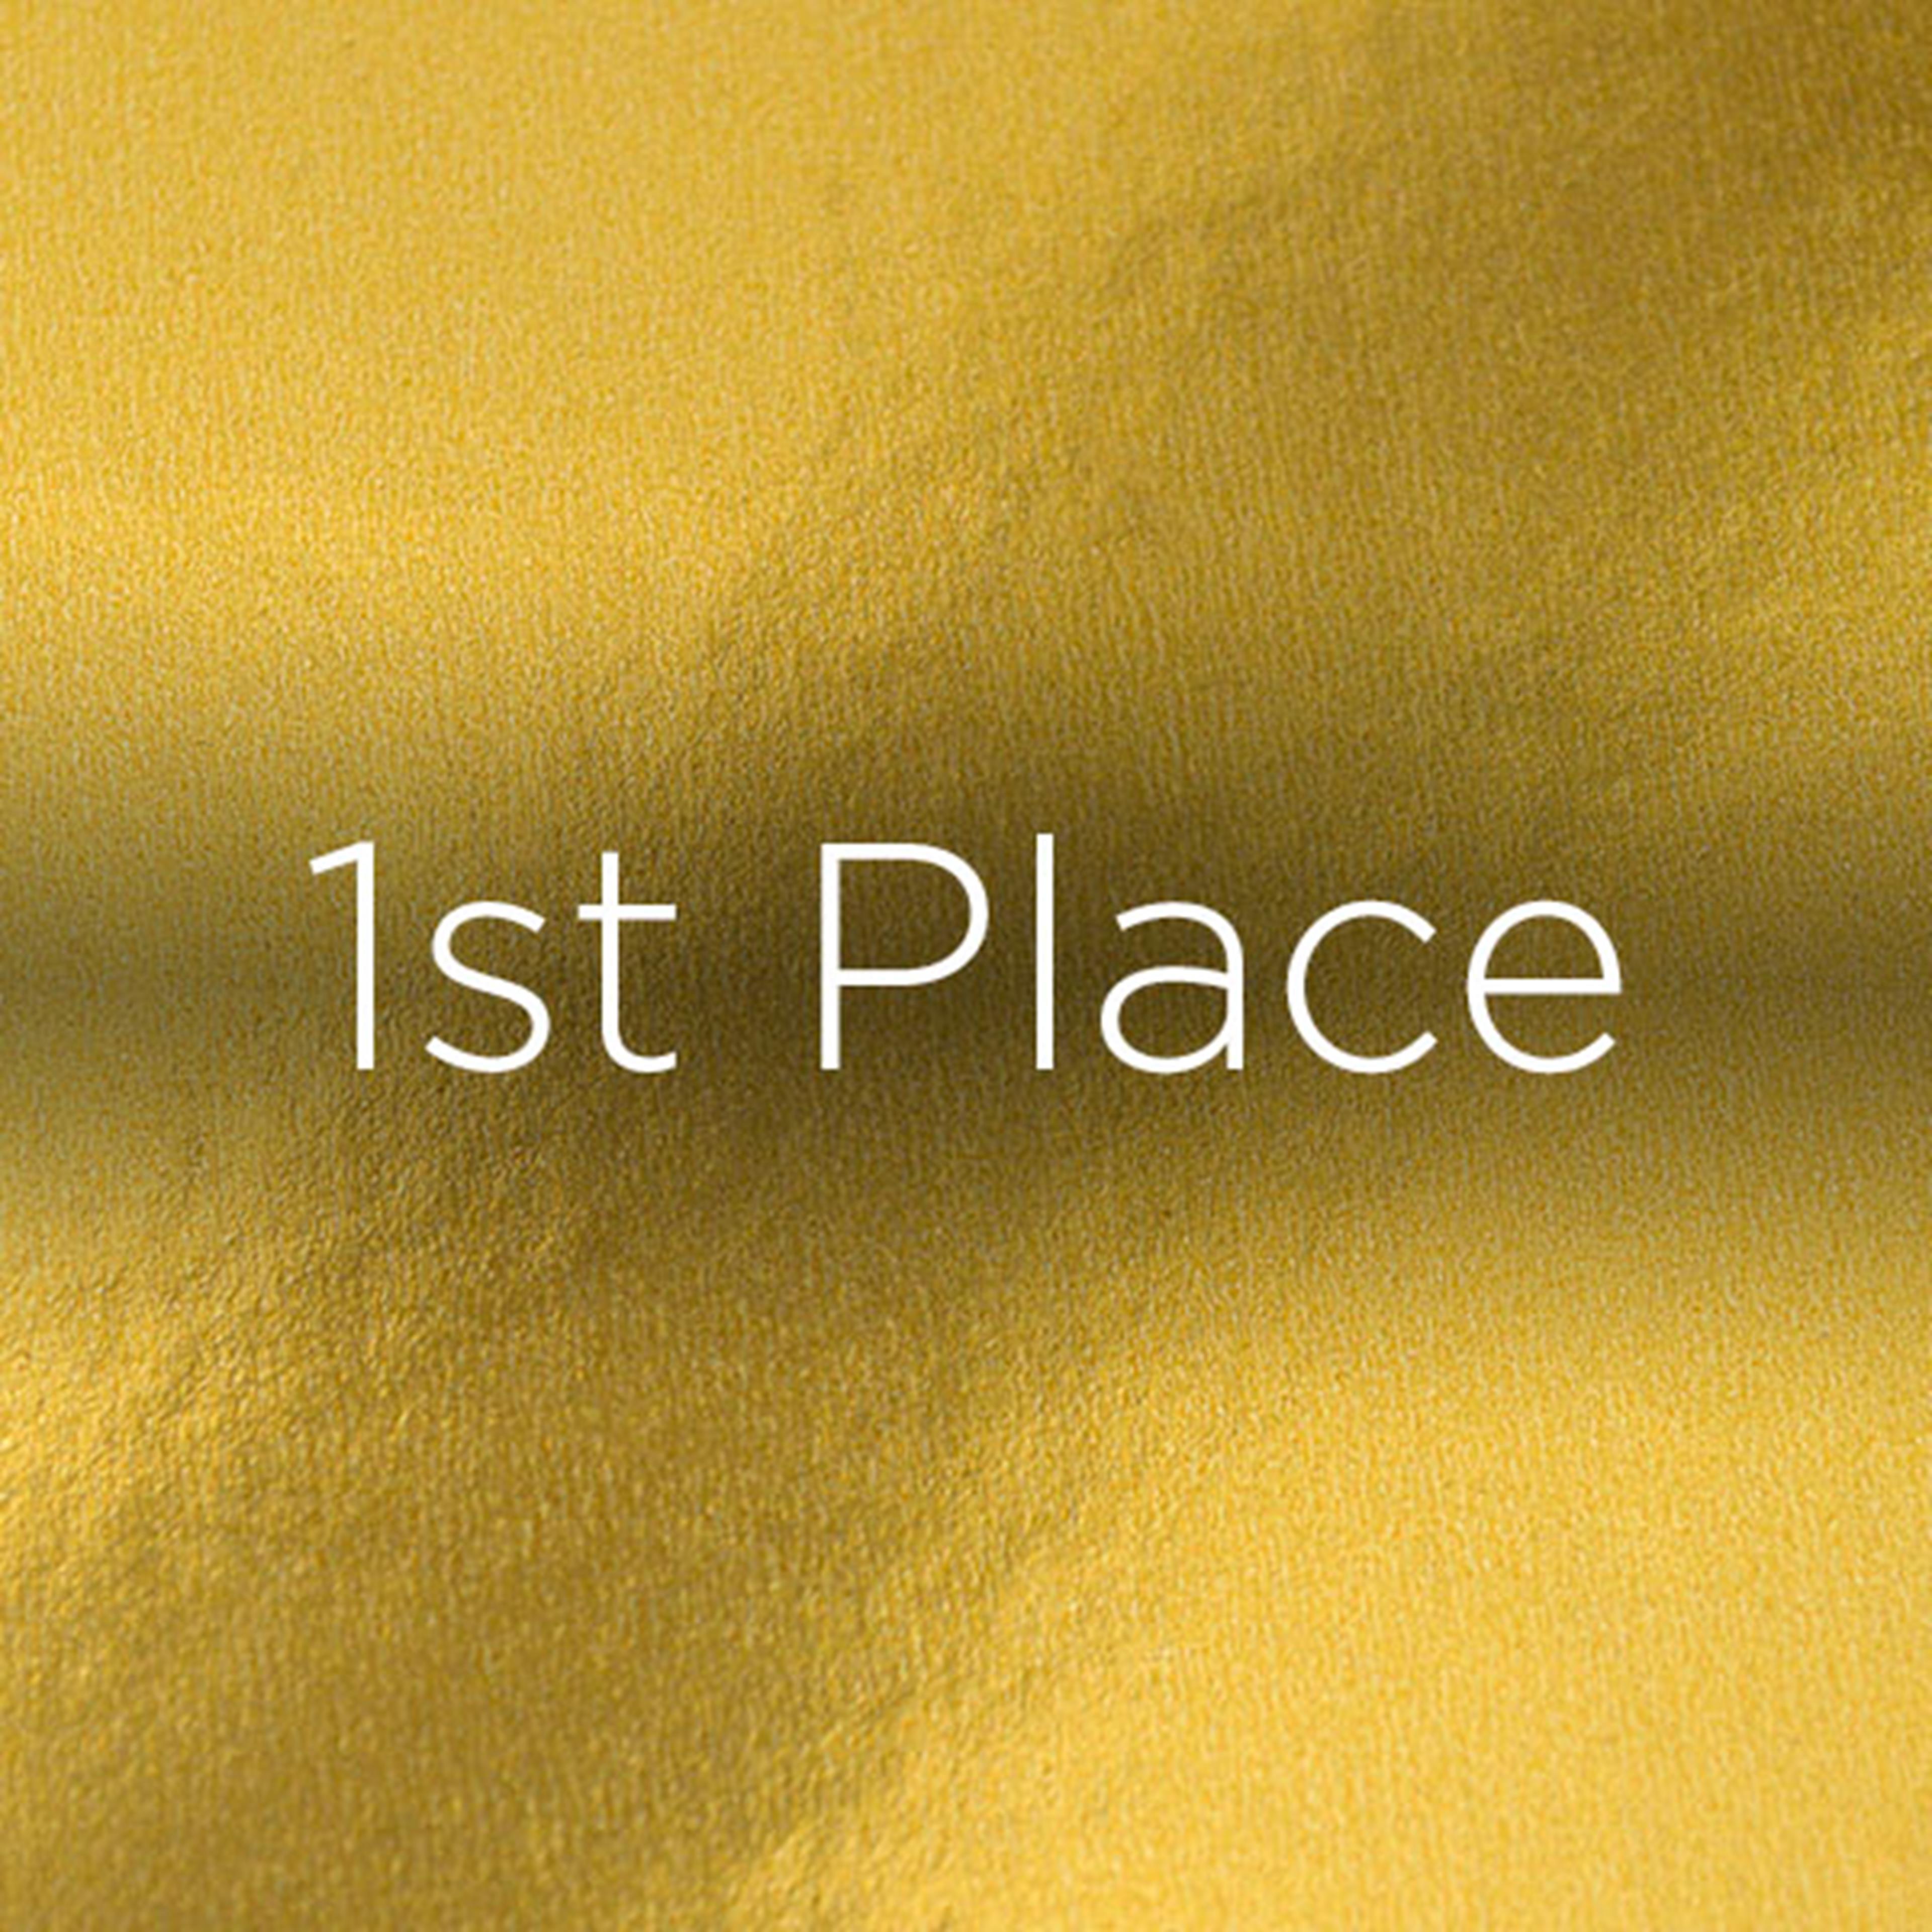 First place in text on gold